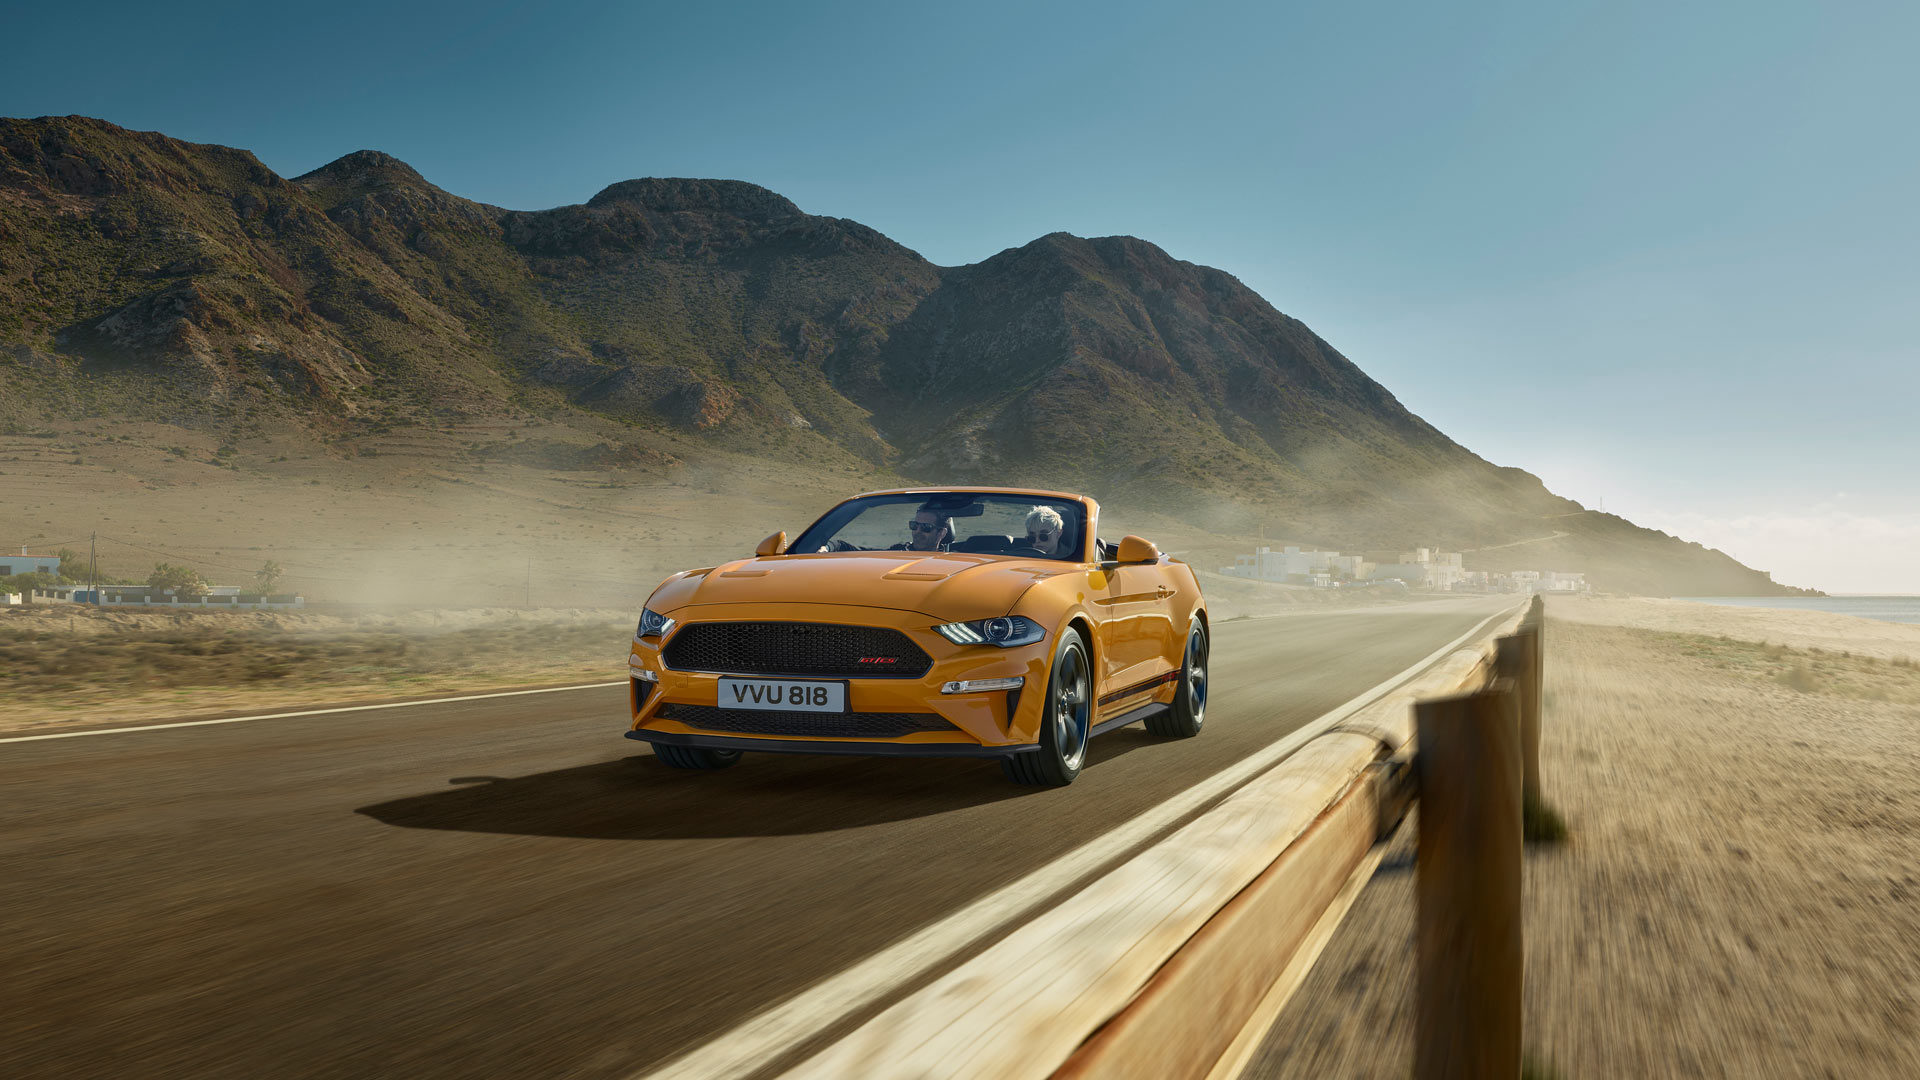 Mustang best-selling sports car